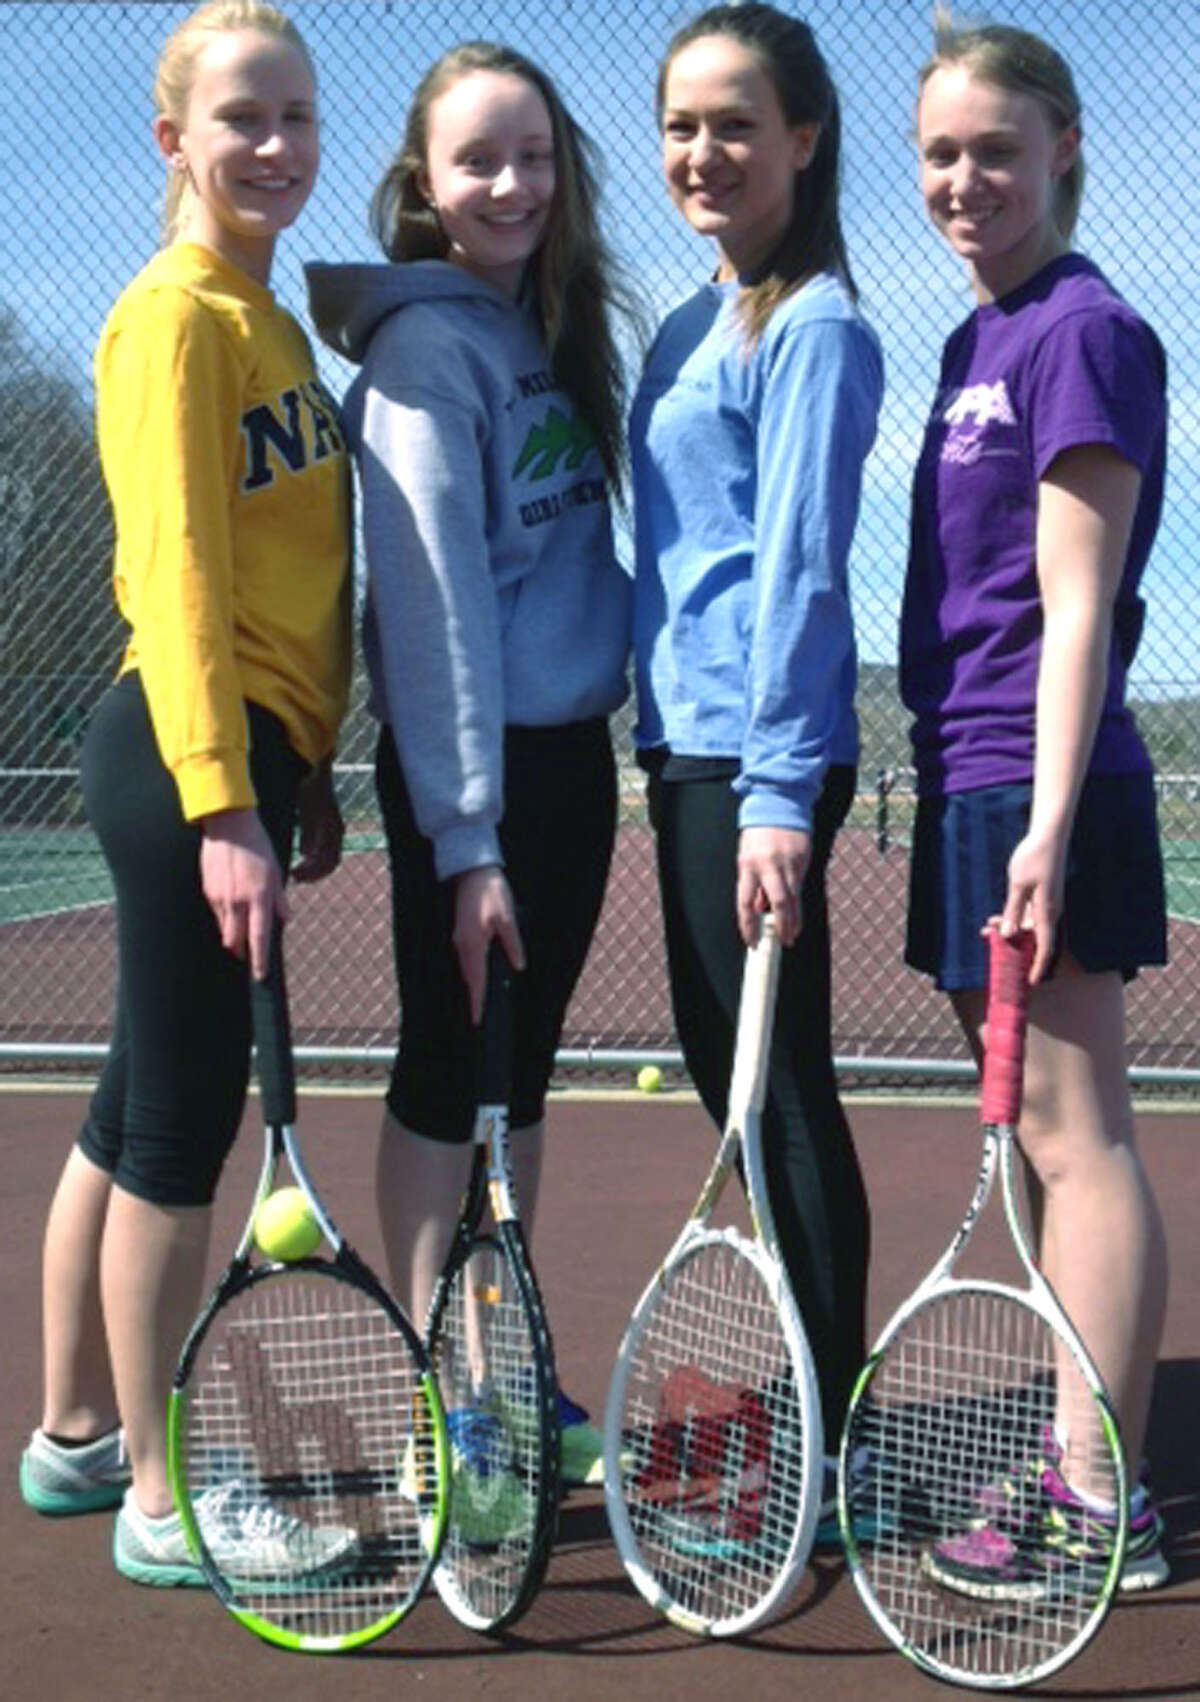 Green Wave seniors, from left to right, Lindsey Bull, Bethany Hunt, Cassie Berger and Michelle Pitcher lend leadership the cause this spring for New Milford High School girls' tennis. April 2013